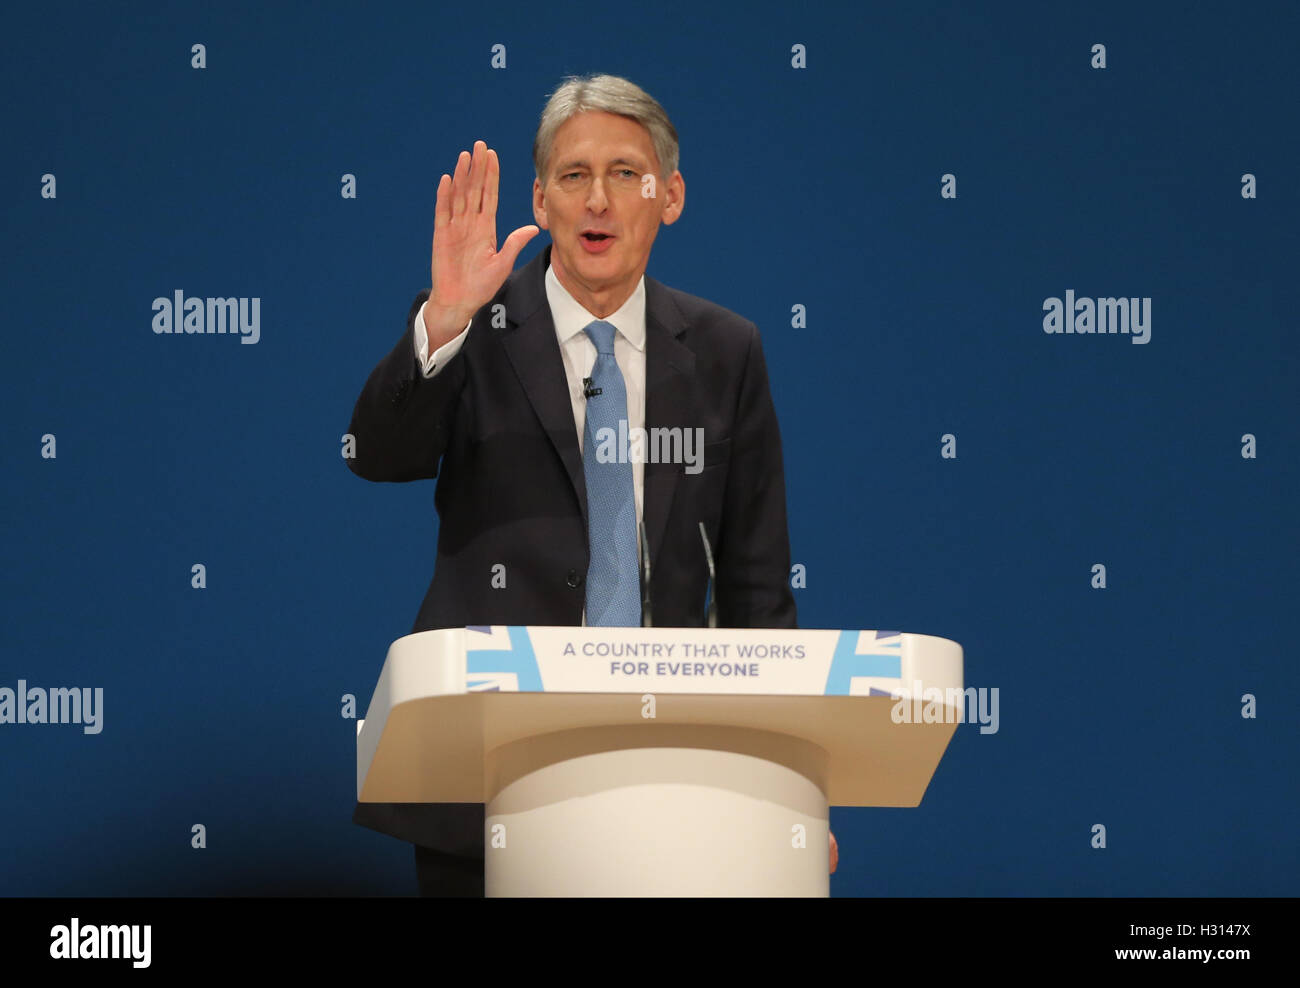 Birmingham, Uk. 3rd October, 2016. Philip Hammond Mp Chancellor Of The Exchequer Conservative Party Conference 2016 The Icc Birmingham, Birmingham, England 03 October 2016 Addresses The Conservative Party Conference 2016 At The Icc Birmingham, Birmingham, England © Allstar Picture Library/Alamy Live News Credit:  Allstar Picture Library/Alamy Live News Stock Photo